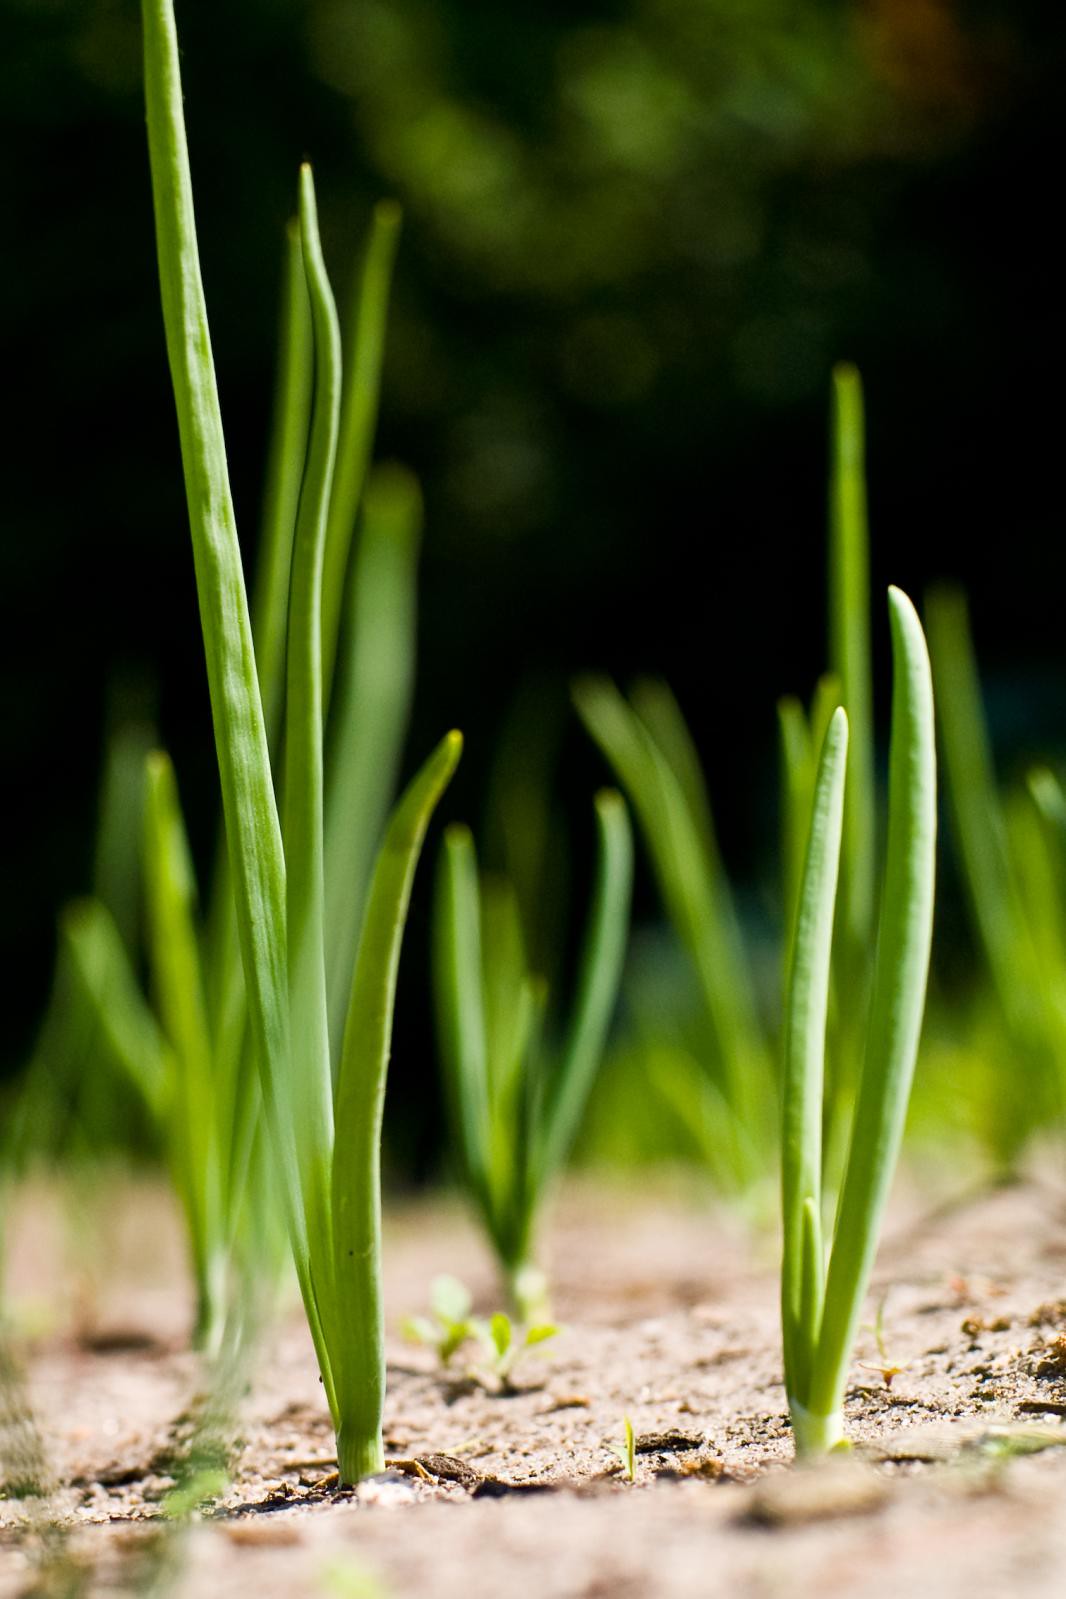 How to Grow Spring Onions